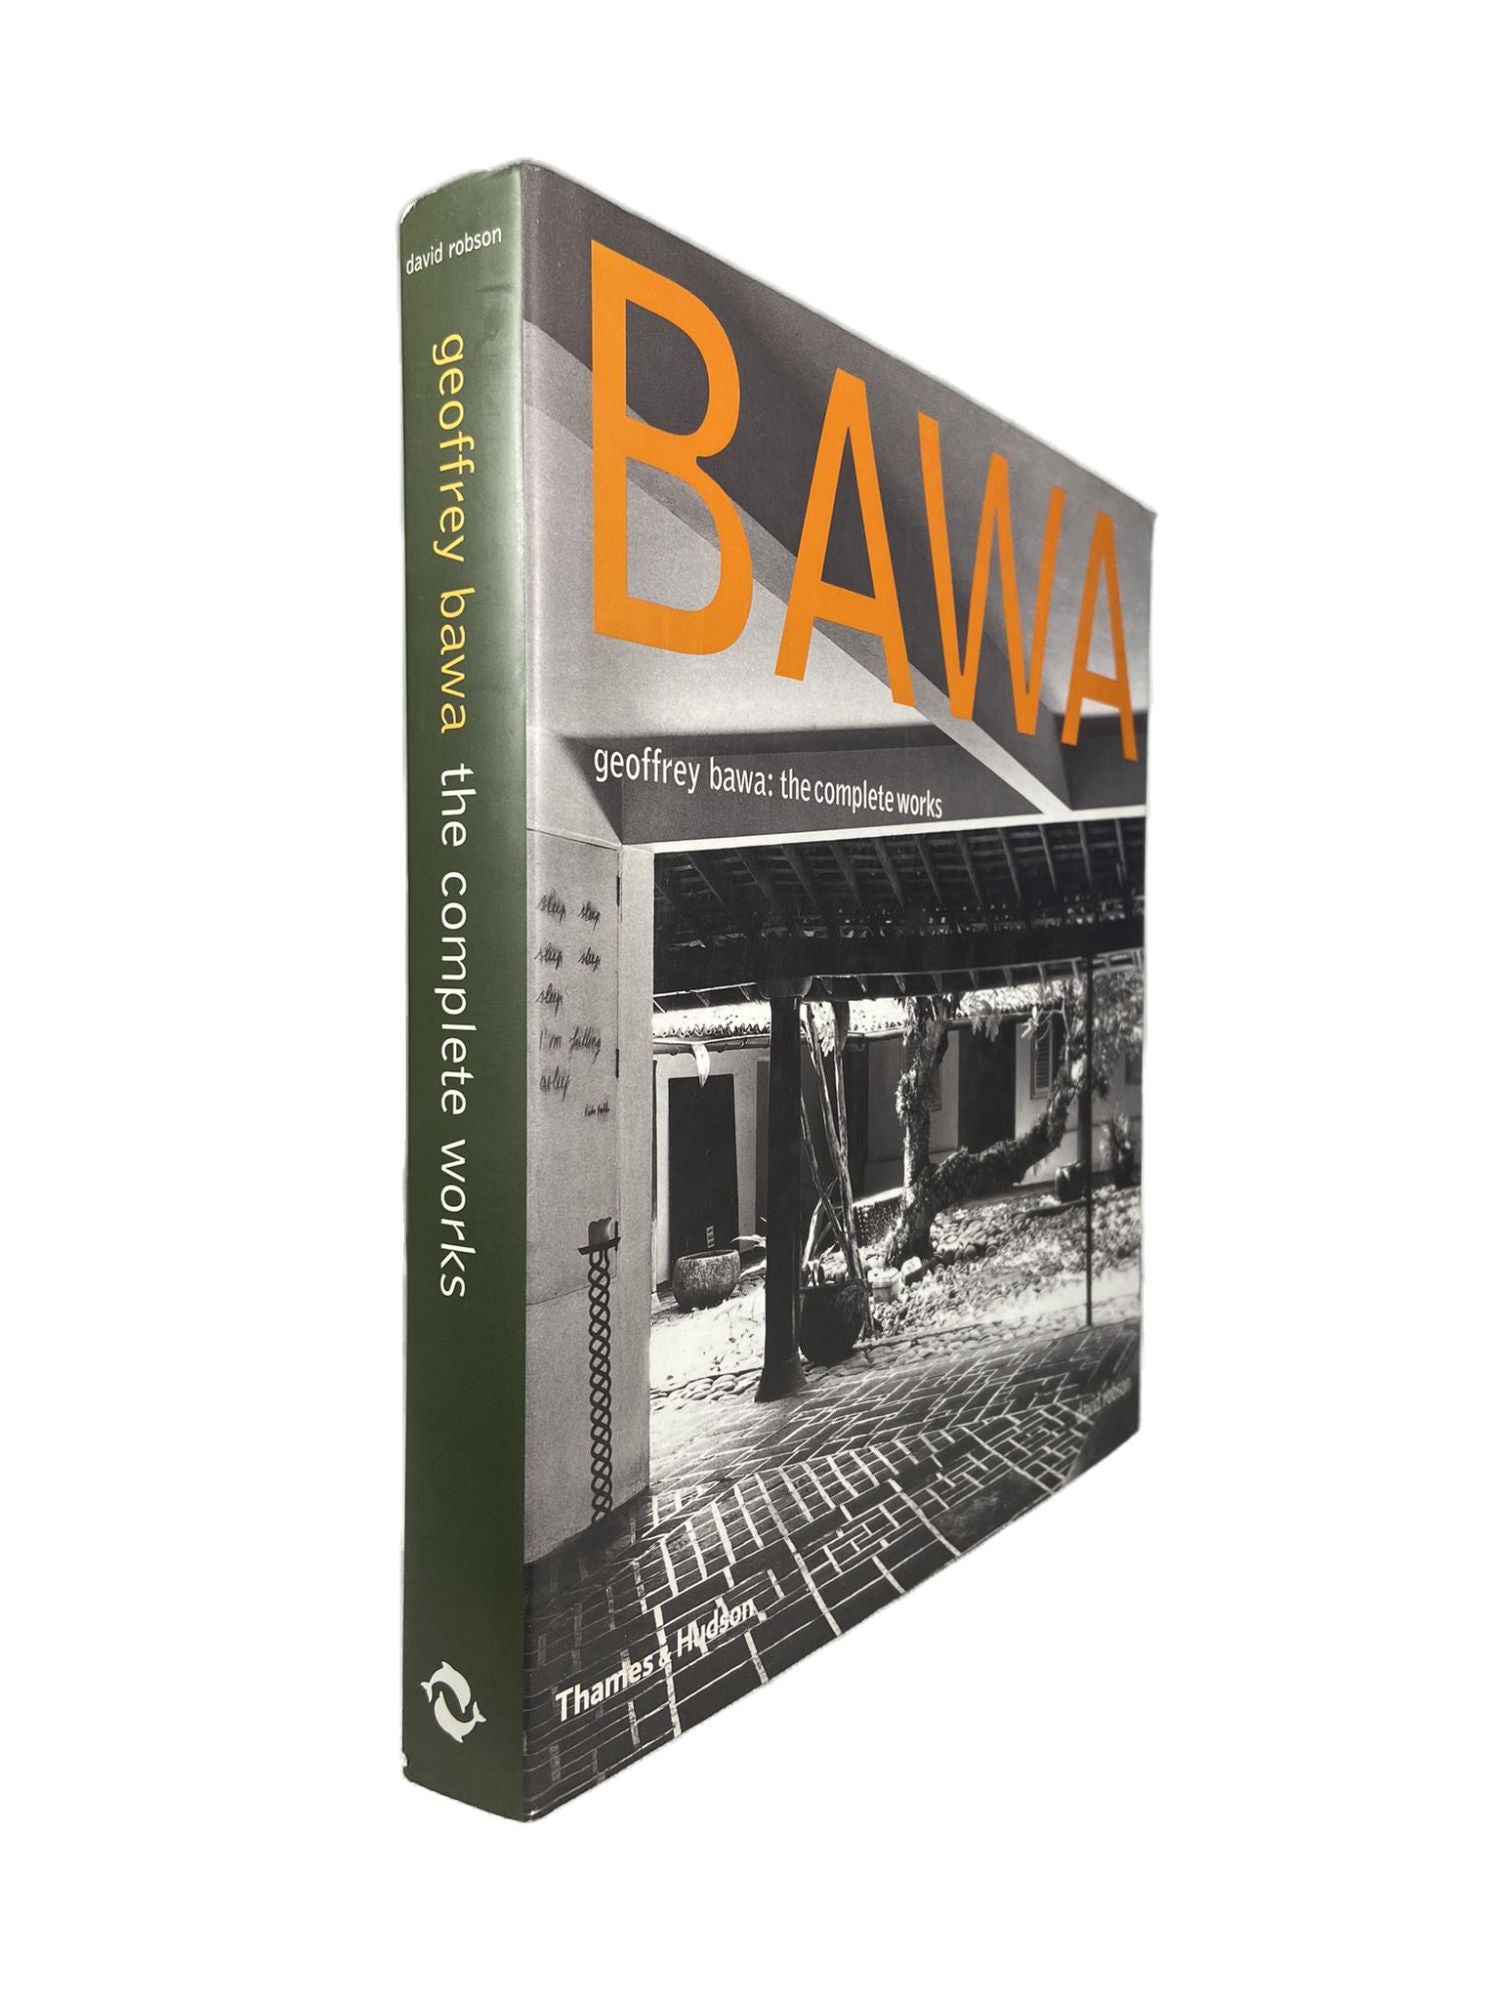 Geoffrey Bawa: The Complete Works by David ROBSON on Archives Fine Books